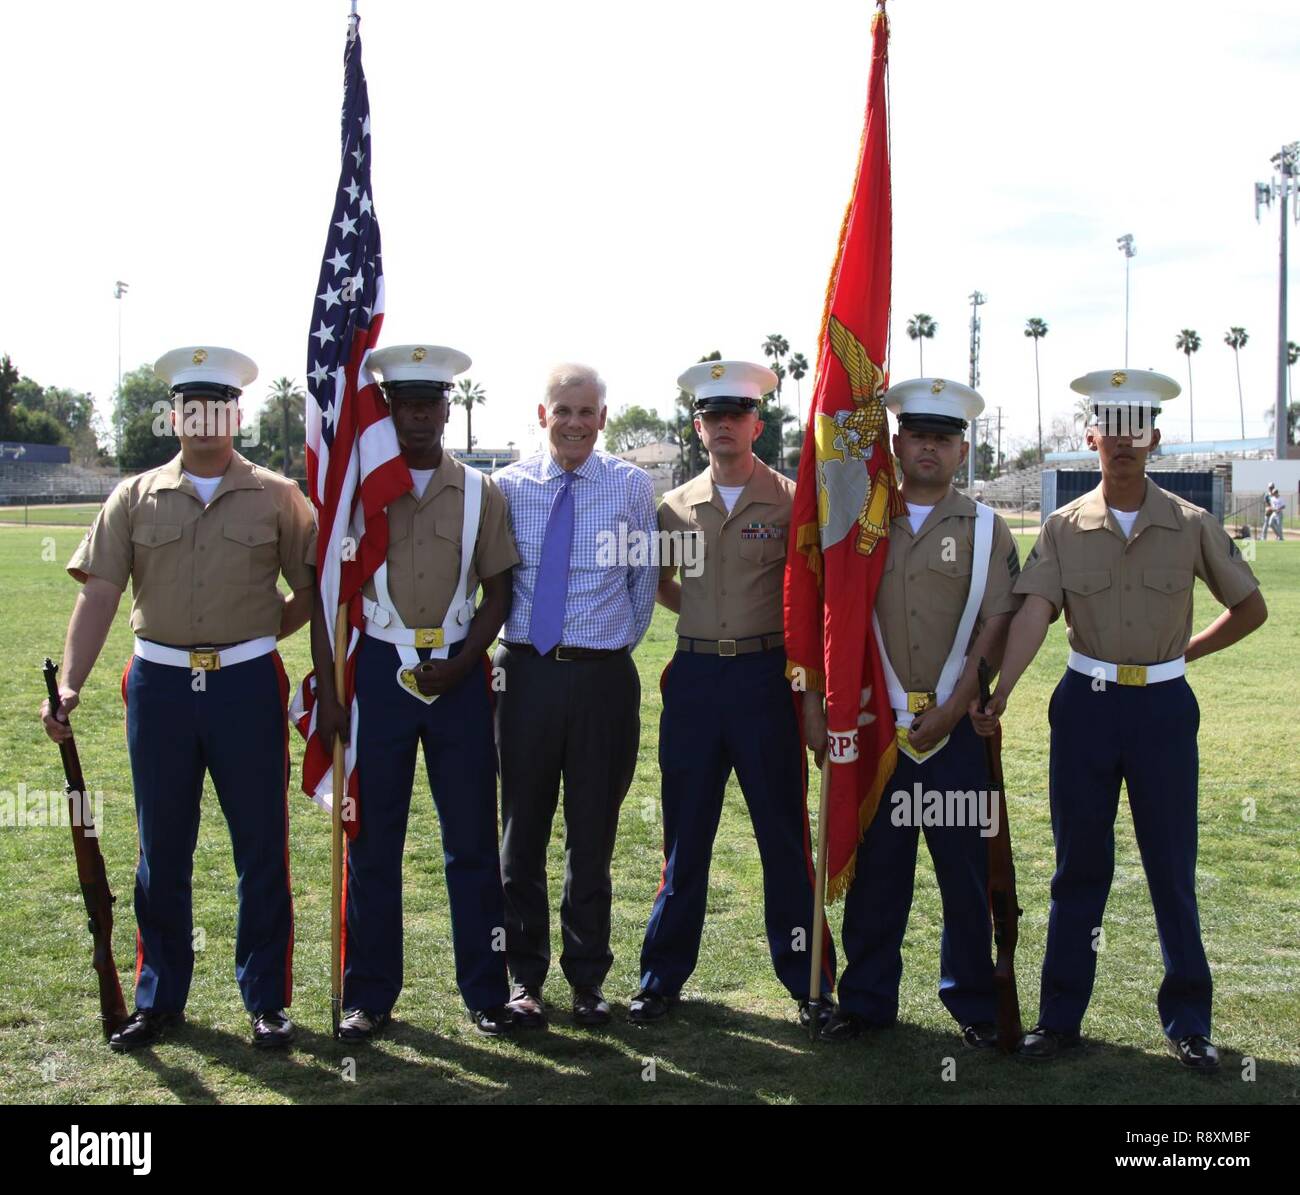 Left to right, Marine Corps Recruiters Sgt. Elijah Gable, Sgt. Derrick Berrian, Mr. Dennis Mulhaupt, president of St. John Bosco High School, SSgt. Phillip Page, Sgt. Victor Romualdo and LCpl. Ulixes Hernandez, pose during a varsity baseball game at St. John Bosco High School, Bellflower, Calif., March 14, 2017. Coming from Recruiting Substation Lakewood, the recruiters were the official color guard for the game. Stock Photo